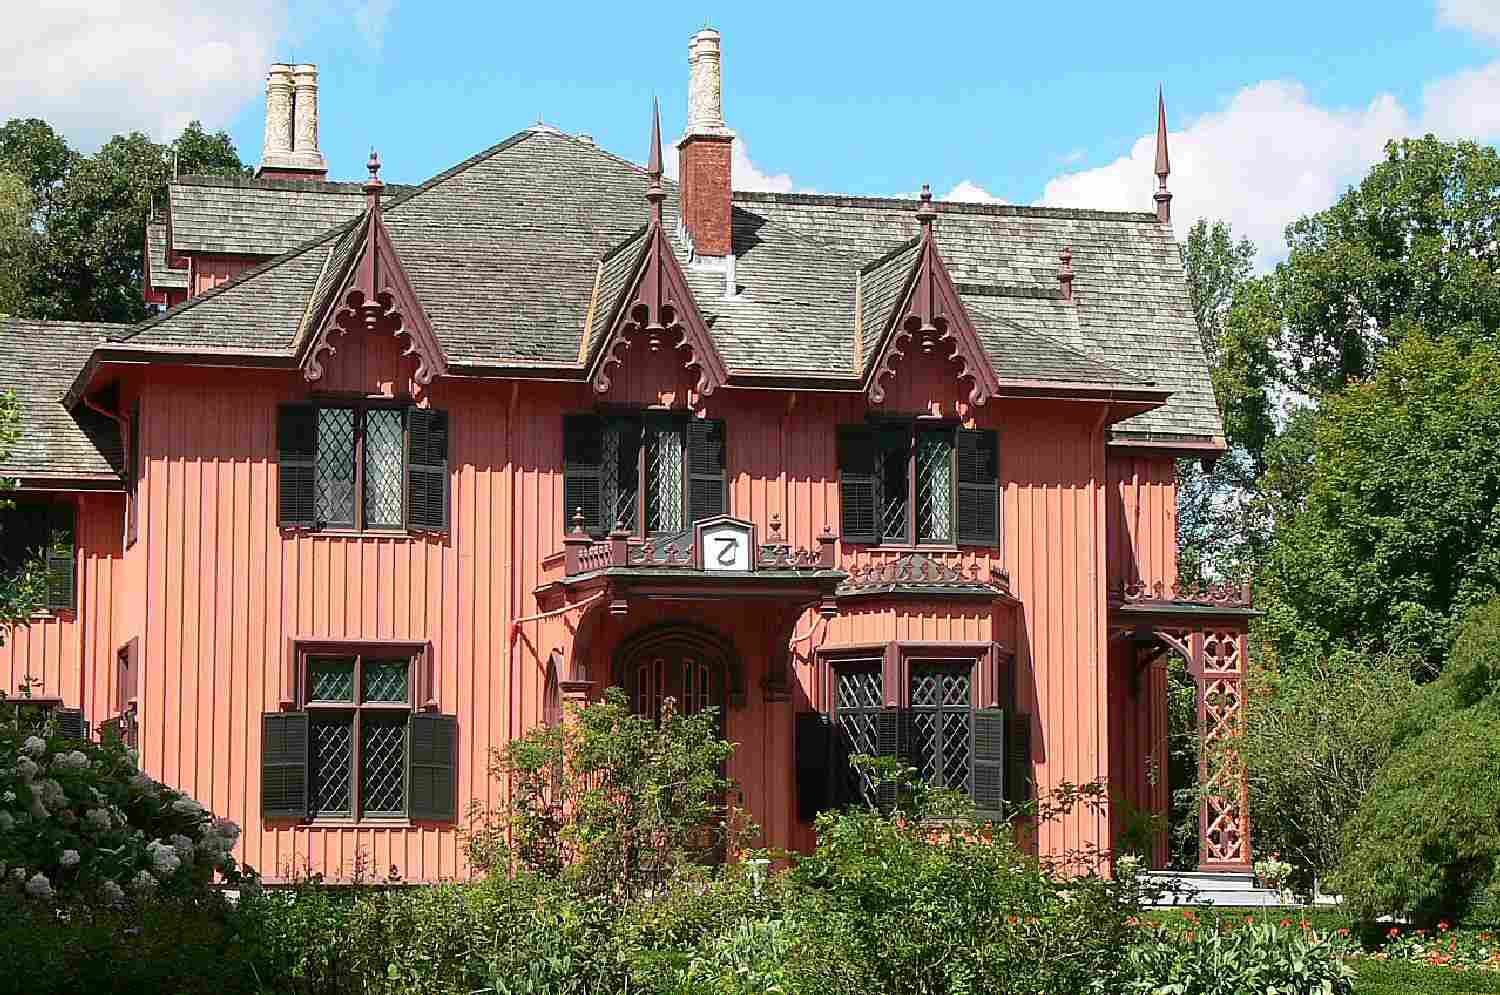 The pinkish Gothic Revival Roseland Cottage in Woodstock, Connecticut